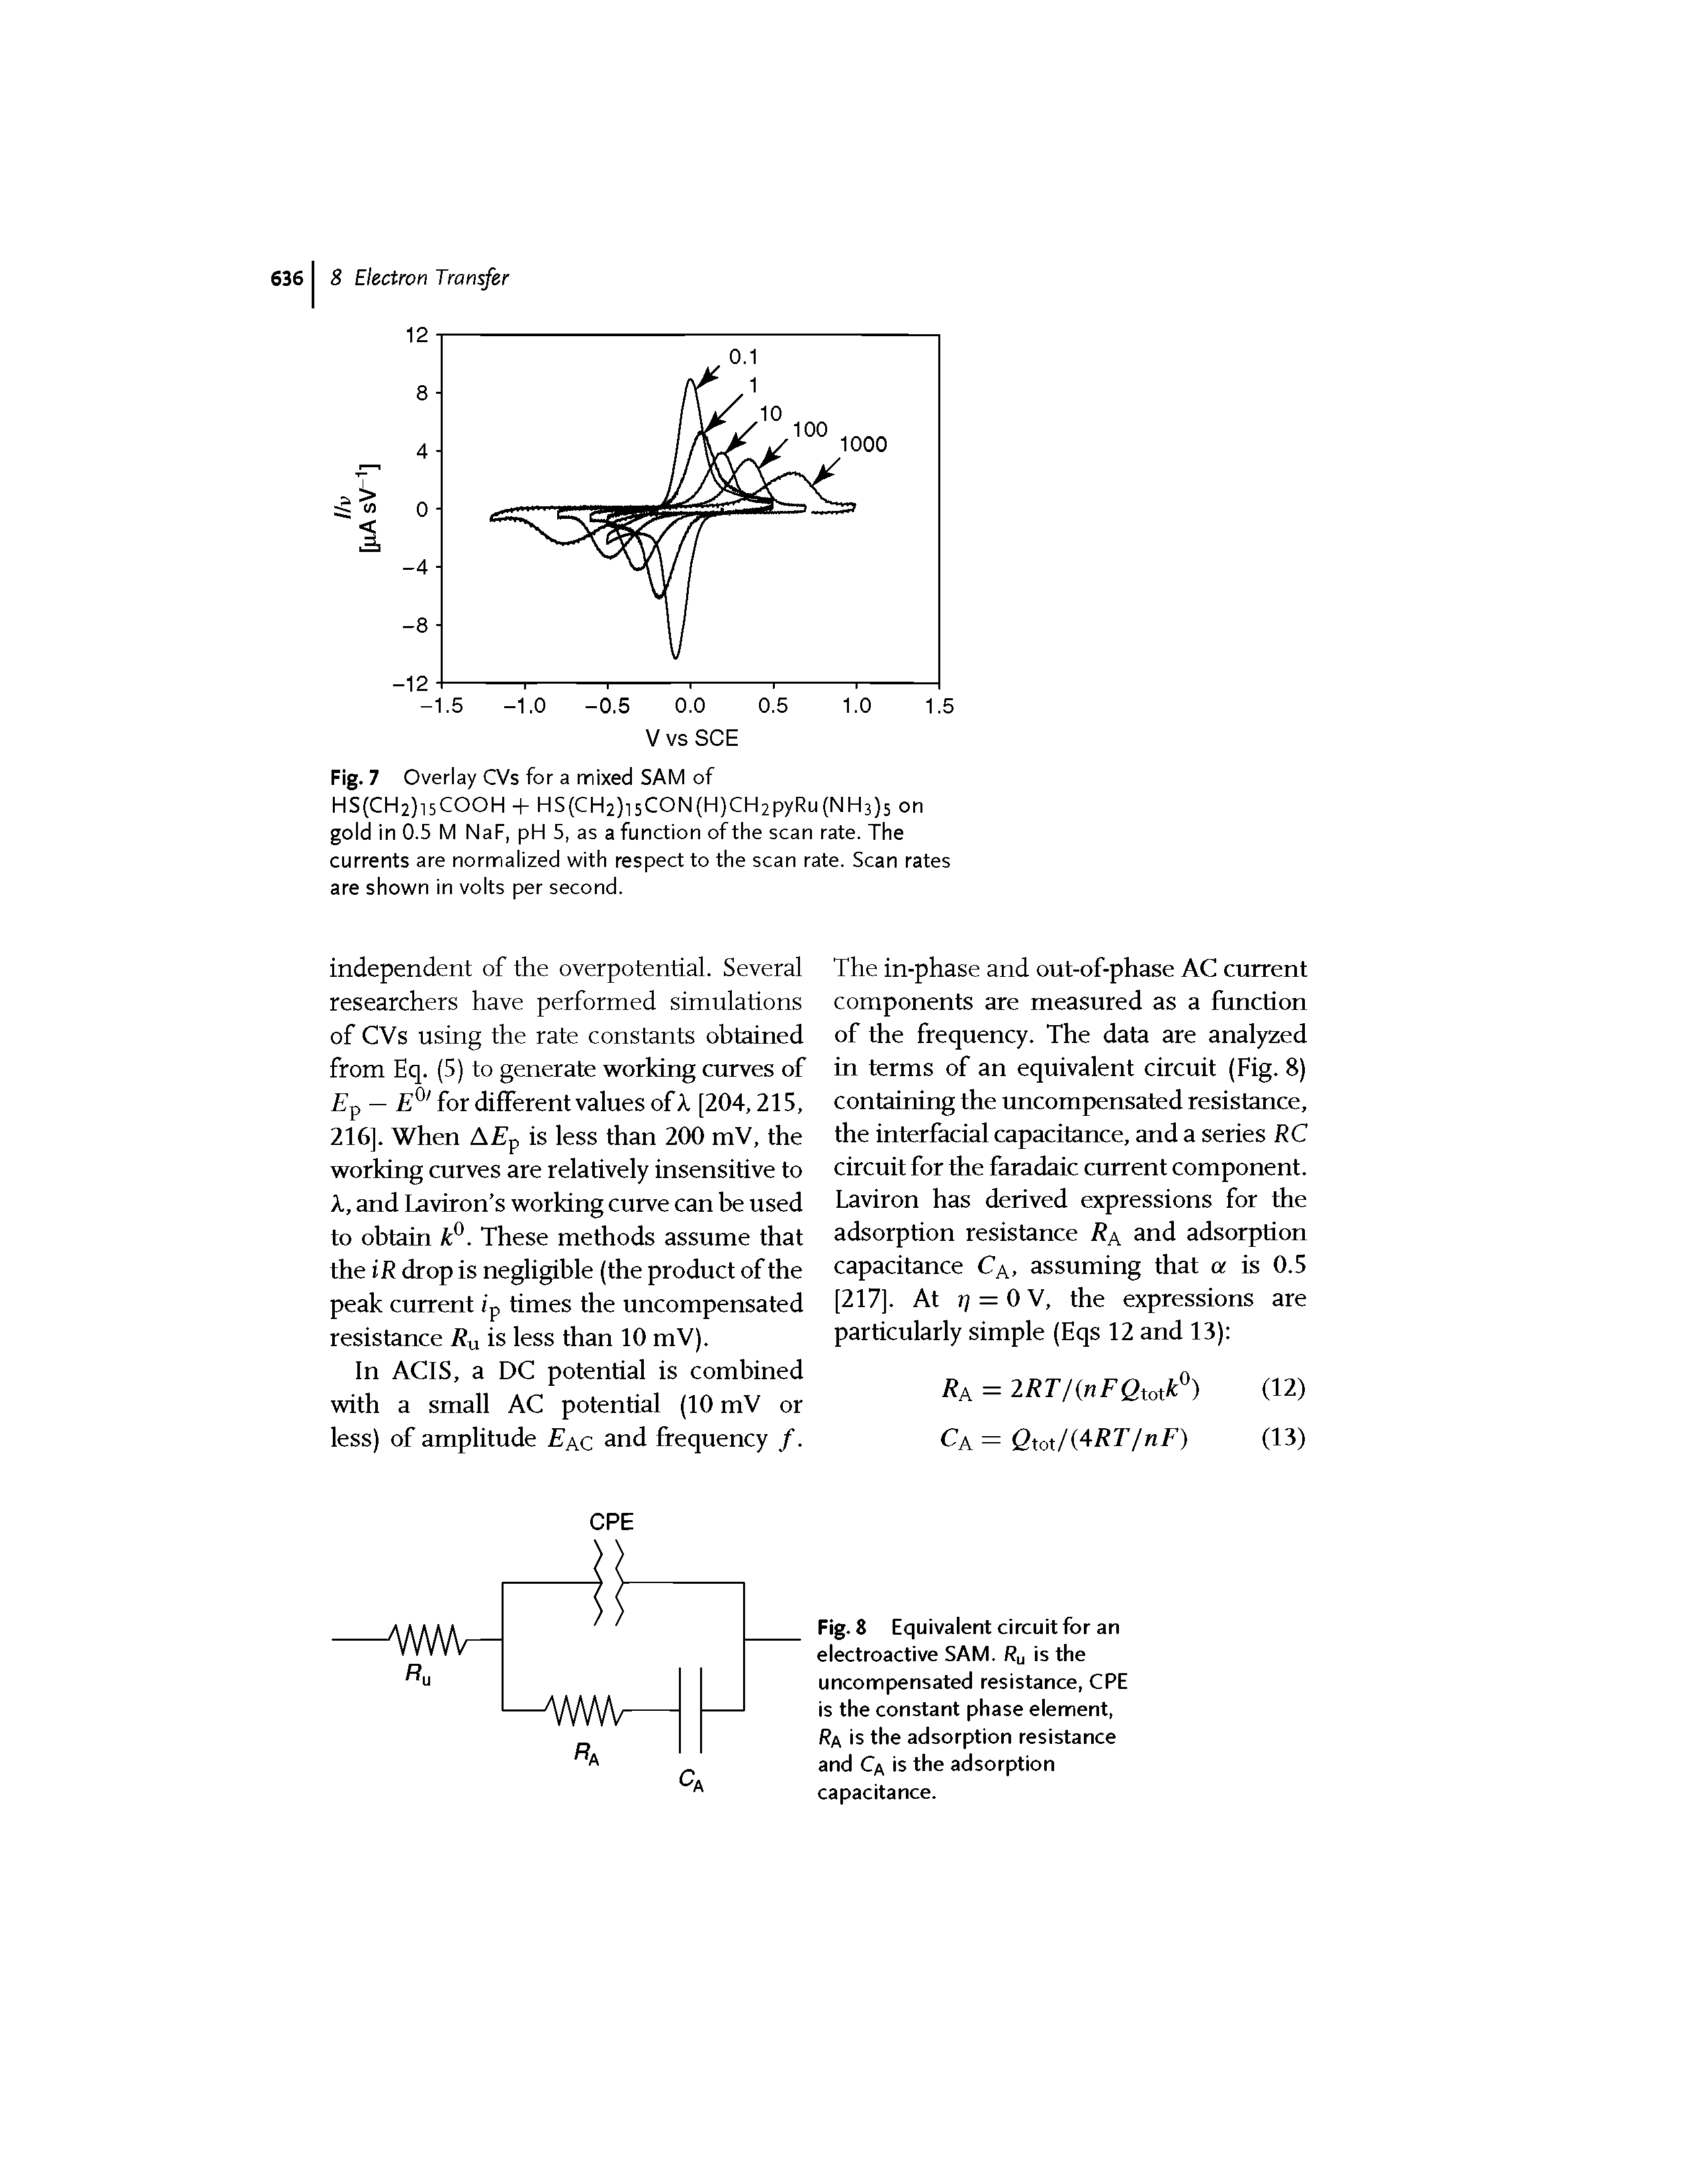 Fig. 8 Equivalent circuit for an electroactive SAM. Ru is the uncompensated resistance, CPE is the constant phase element, Ra is the adsorption resistance and Ca is the adsorption capacitance.